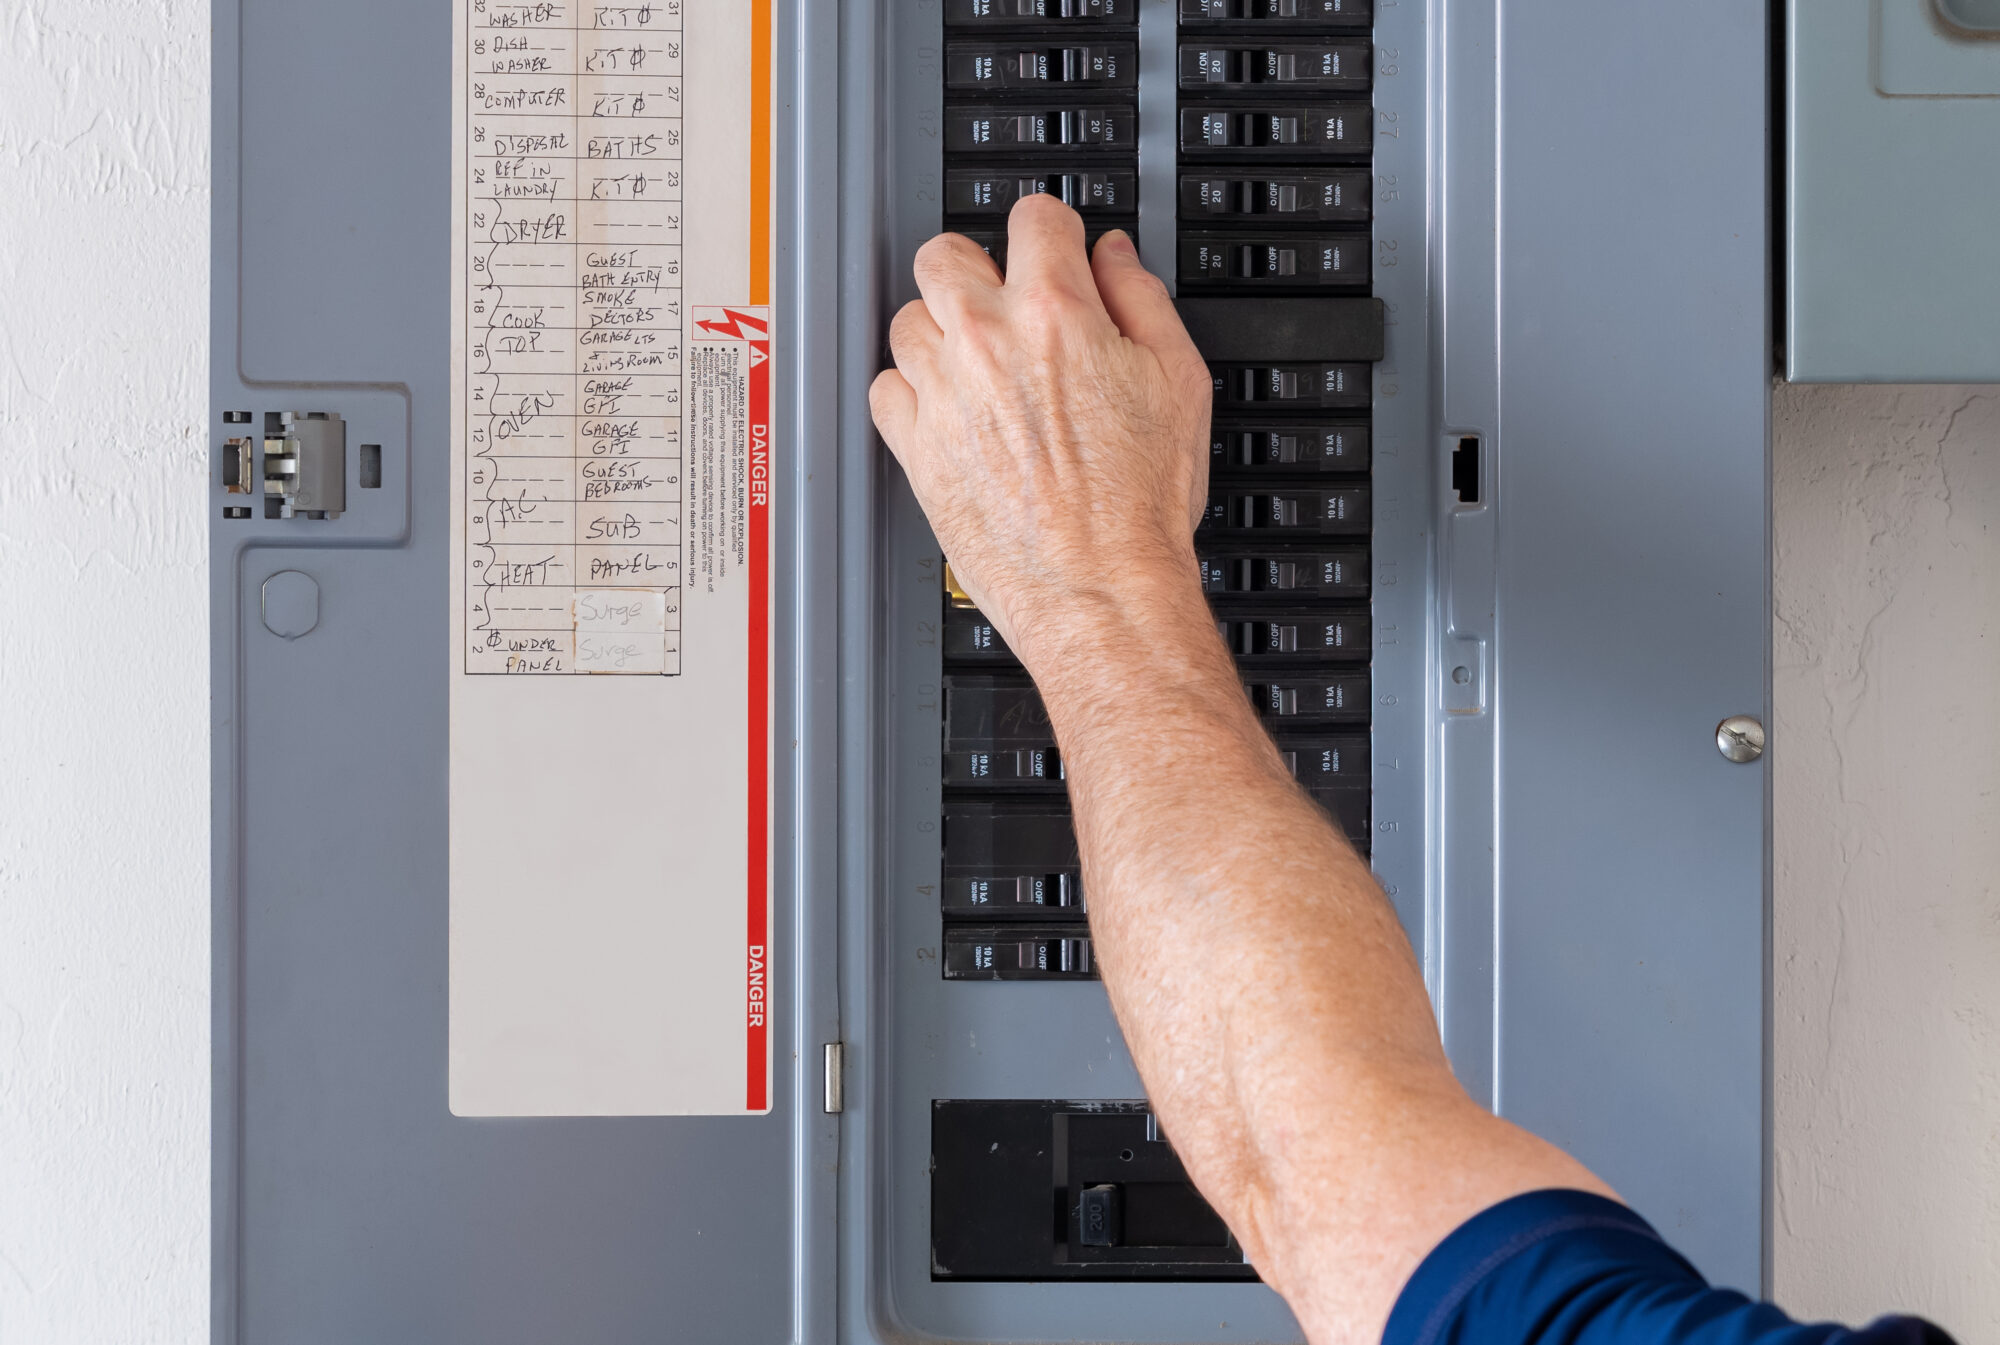 CONTACT TIDAL ELECTRICIANS IN APEX, NC TODAY